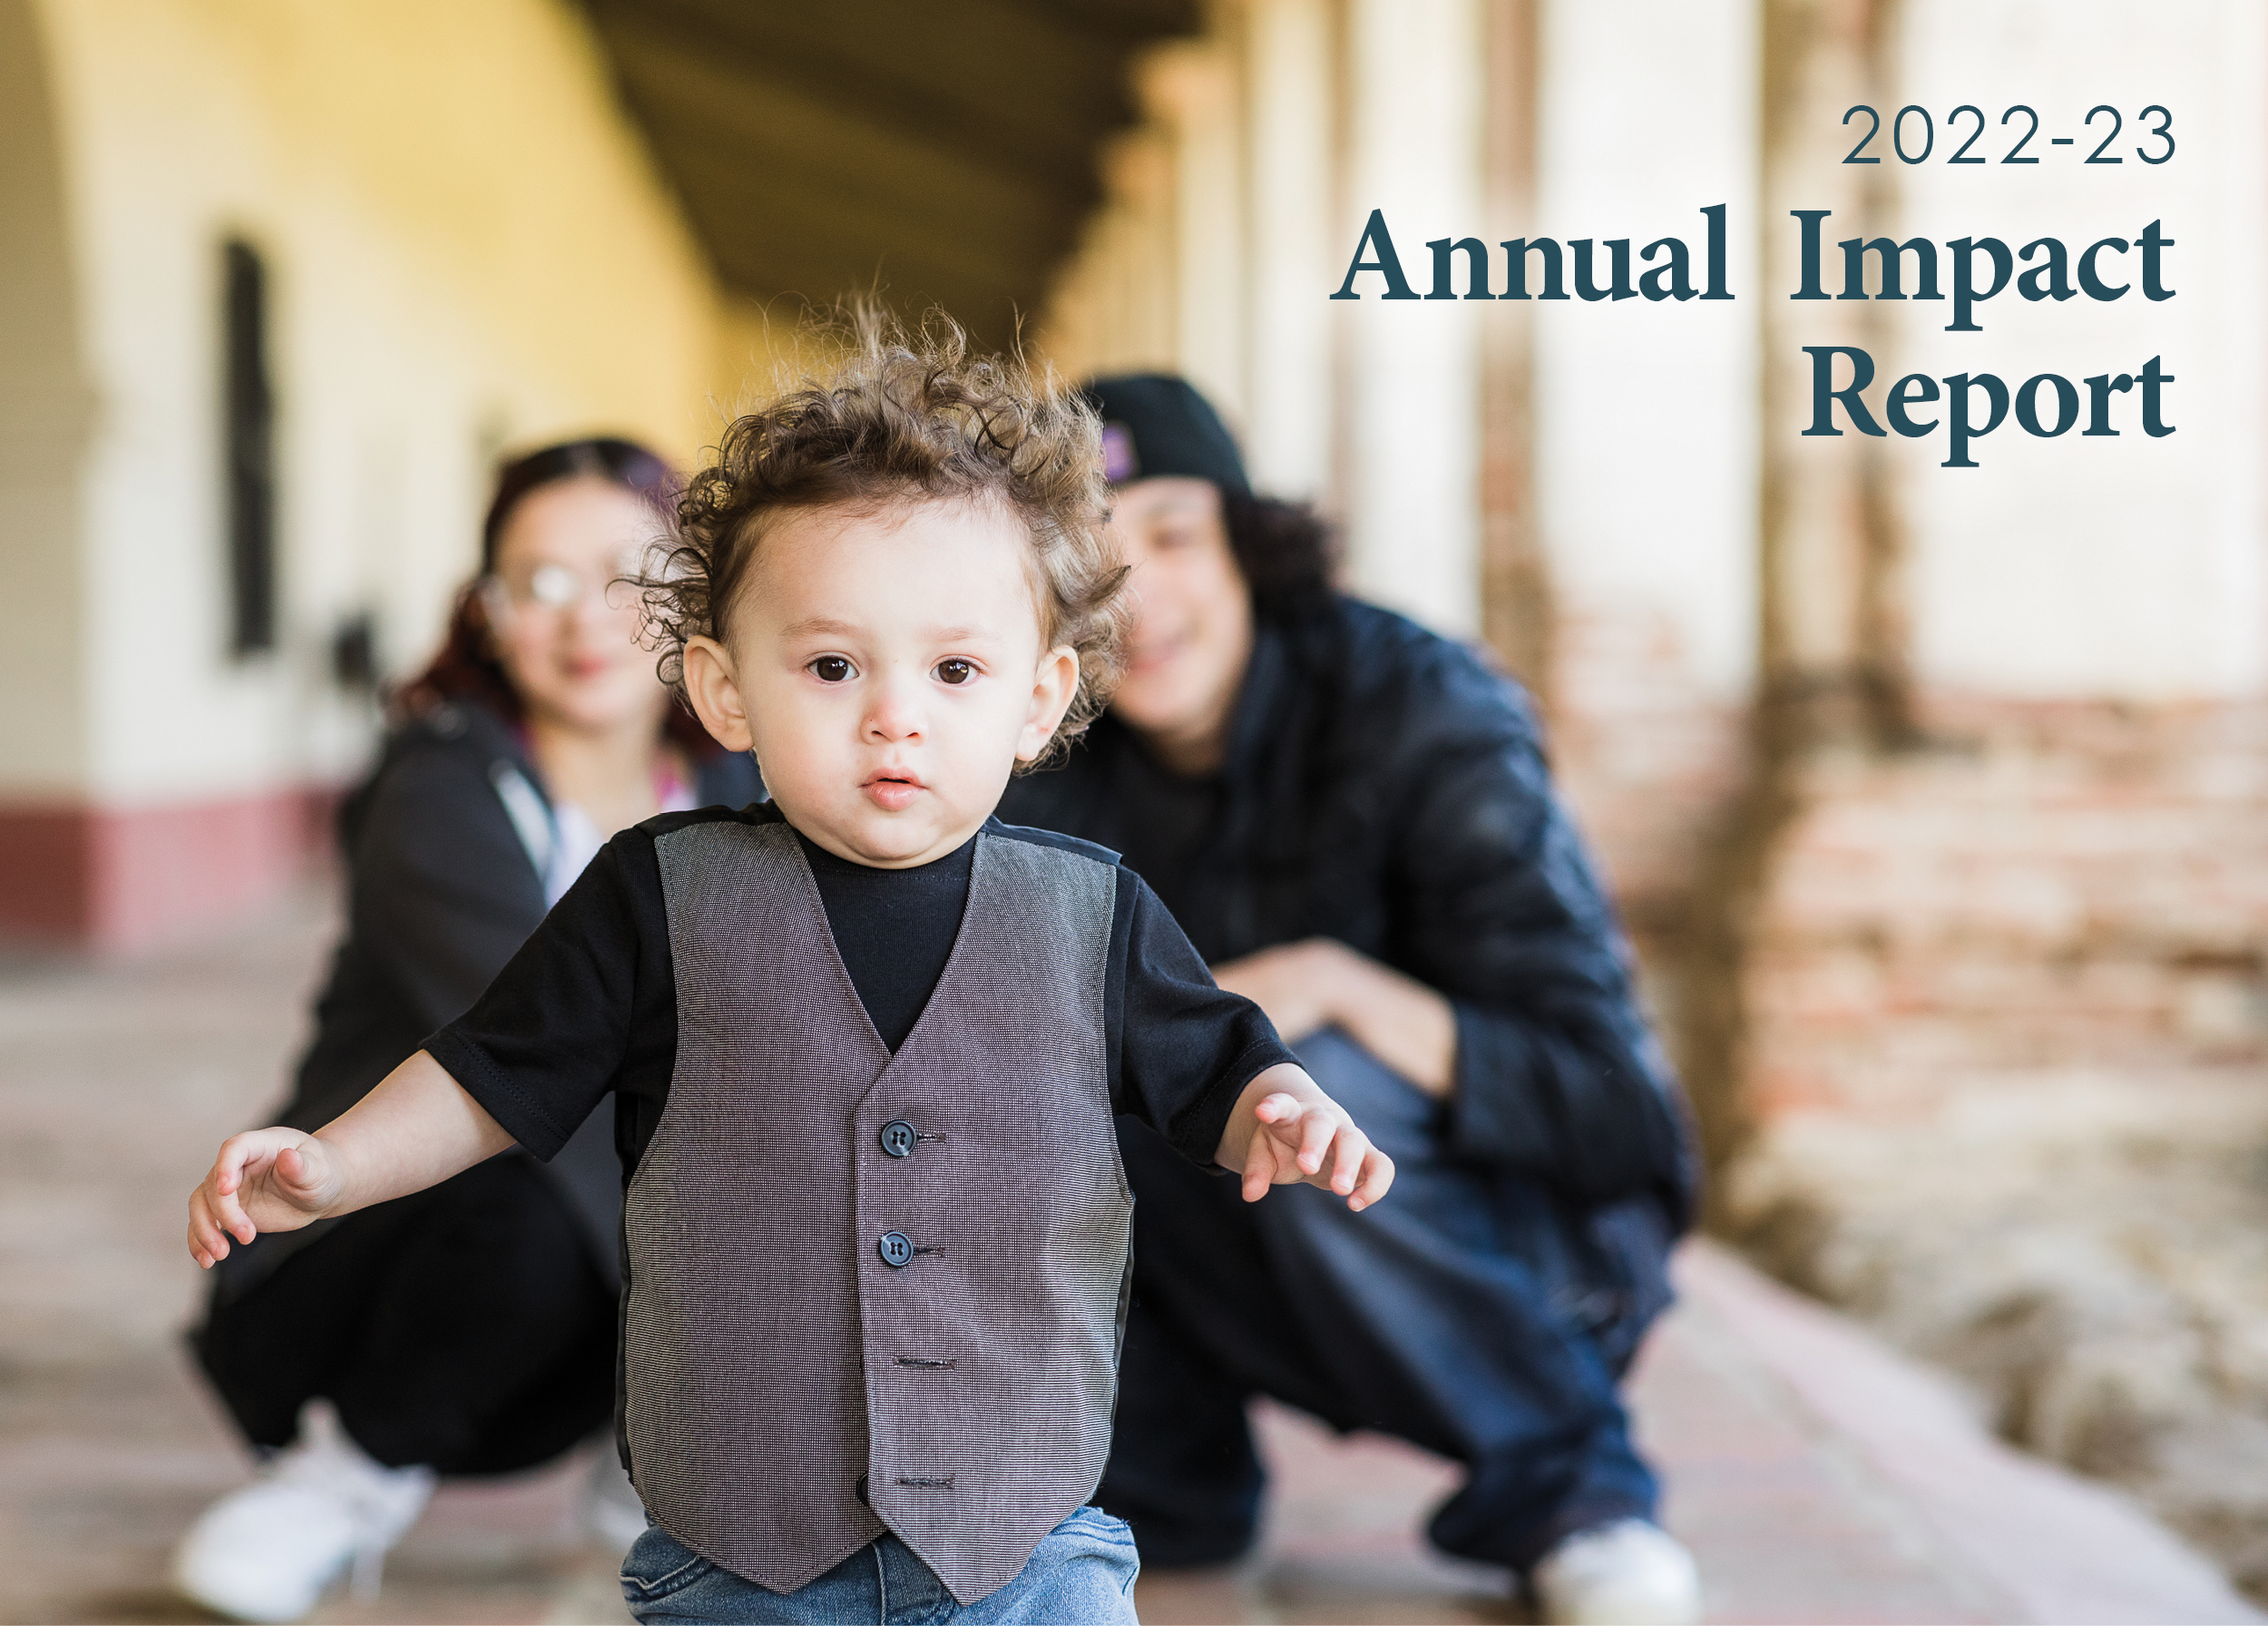 Family Service Agency Annual Impact Report 2022-23